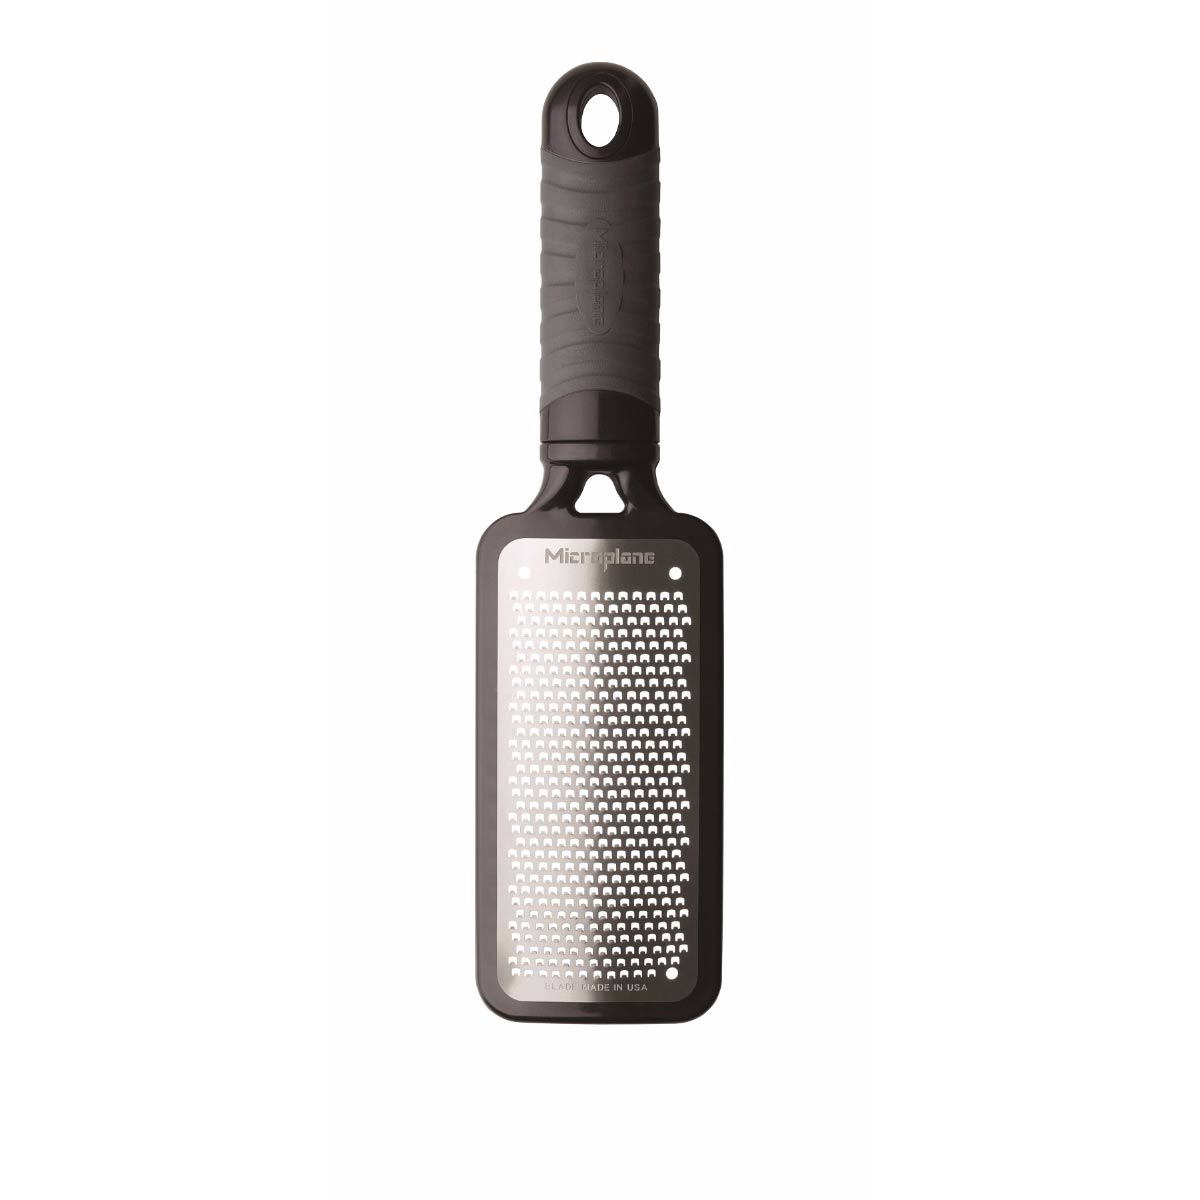 Microplane Home 44002 Food Cheese Grater, Plastic/Stainless Steel, Black - 1